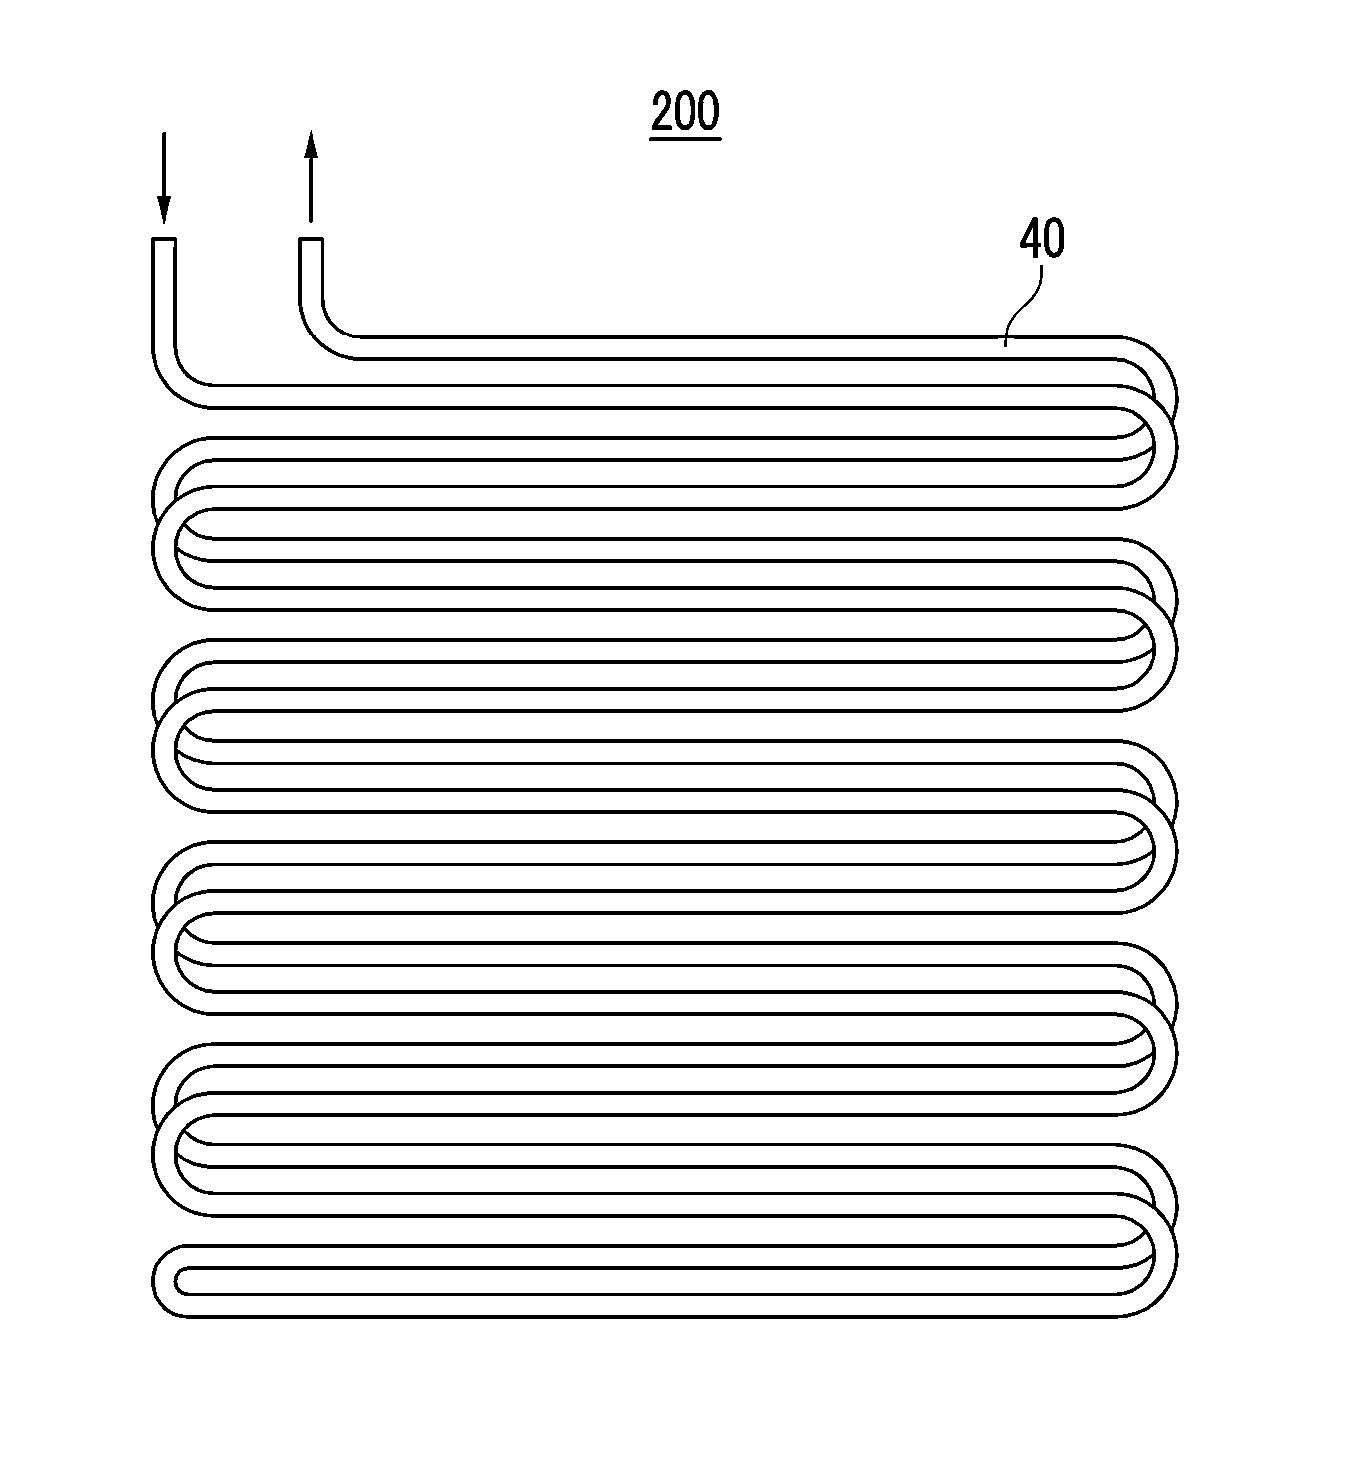 Method for processing a super-hydrophobic surface, and evaporator having the super-hydrophobic surface